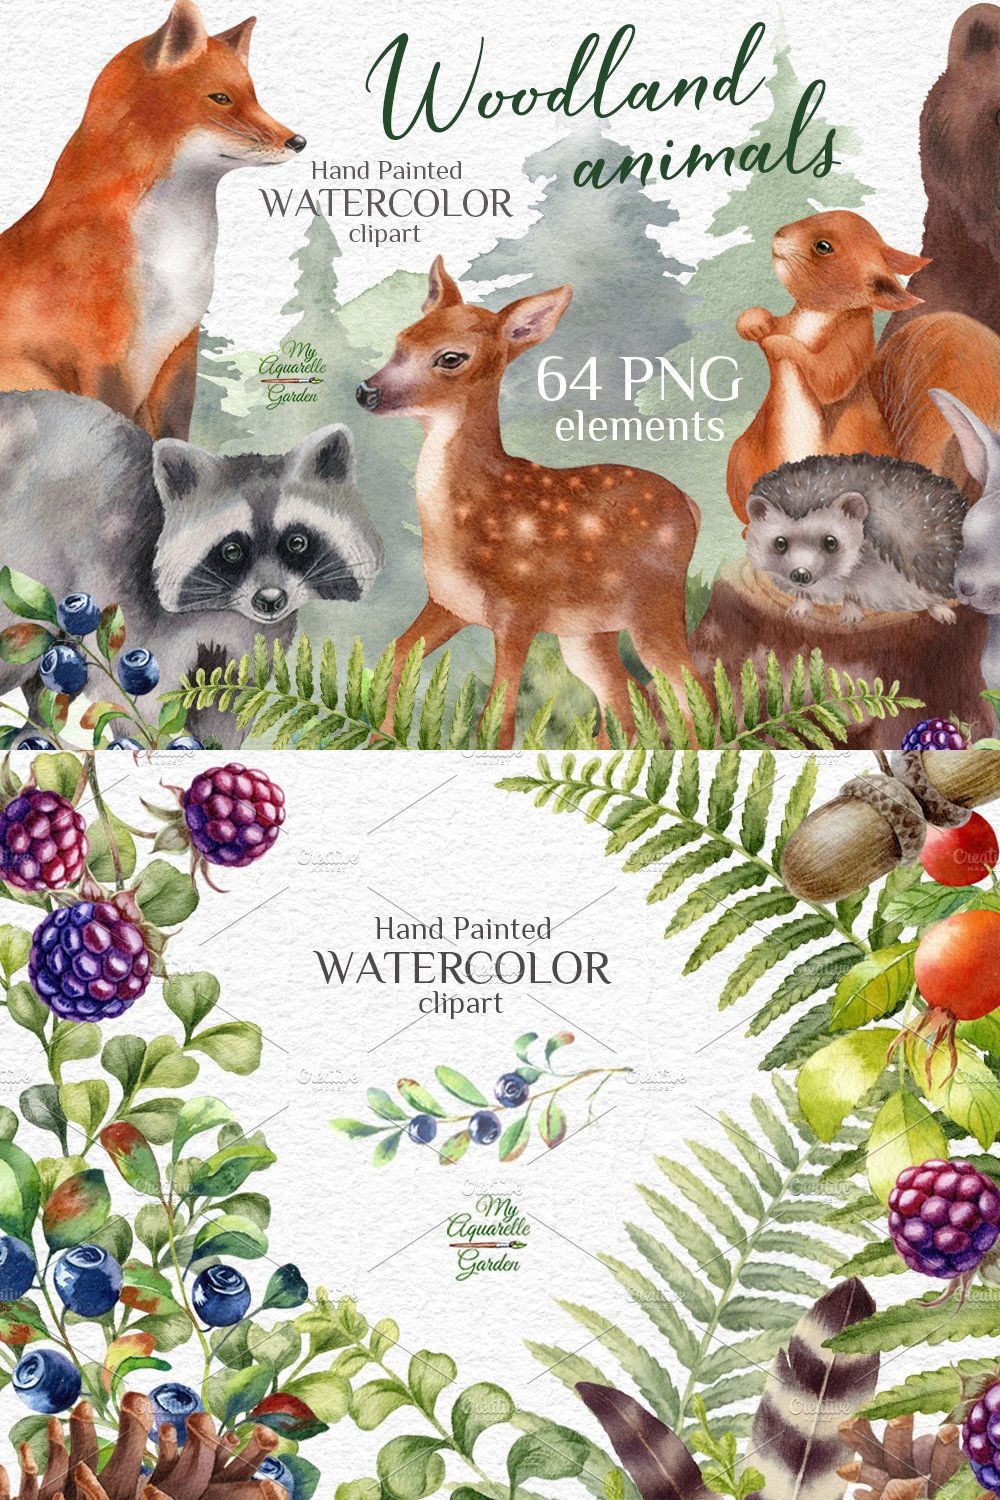 Woodland animals pinterest preview image.